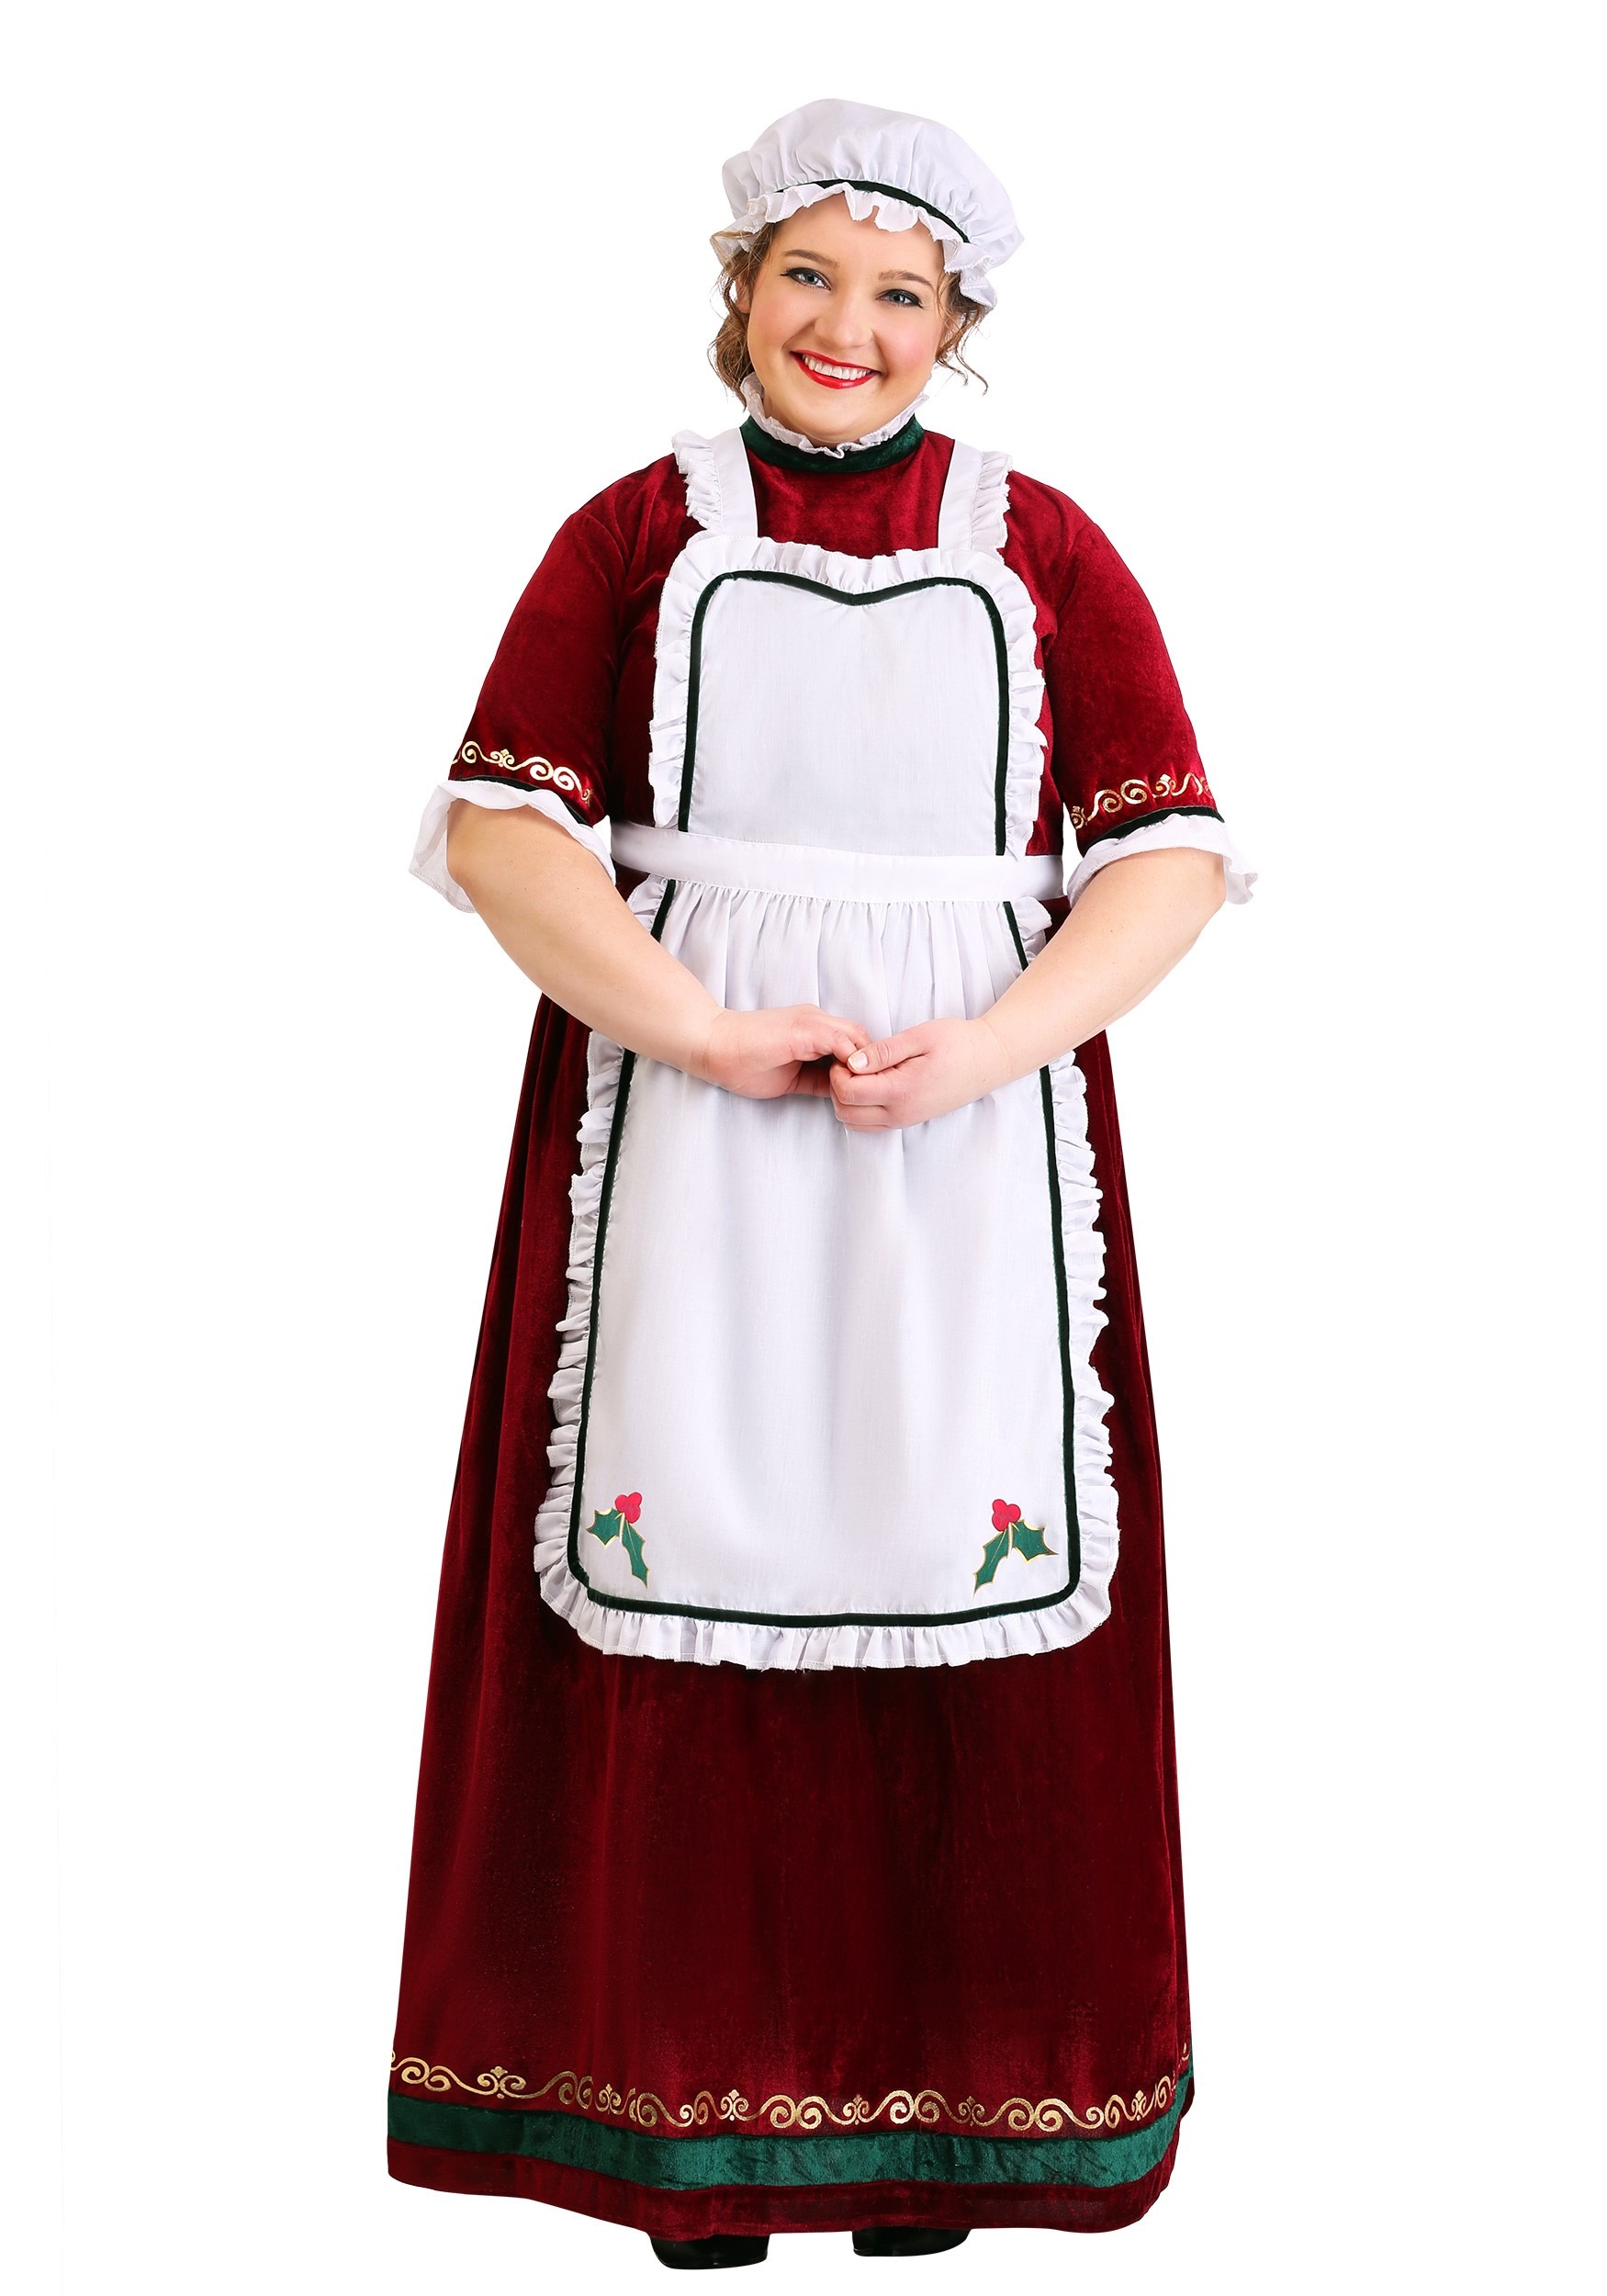 Mrs. Claus Plus Size Women's Holiday Costume , Christmas Costumes